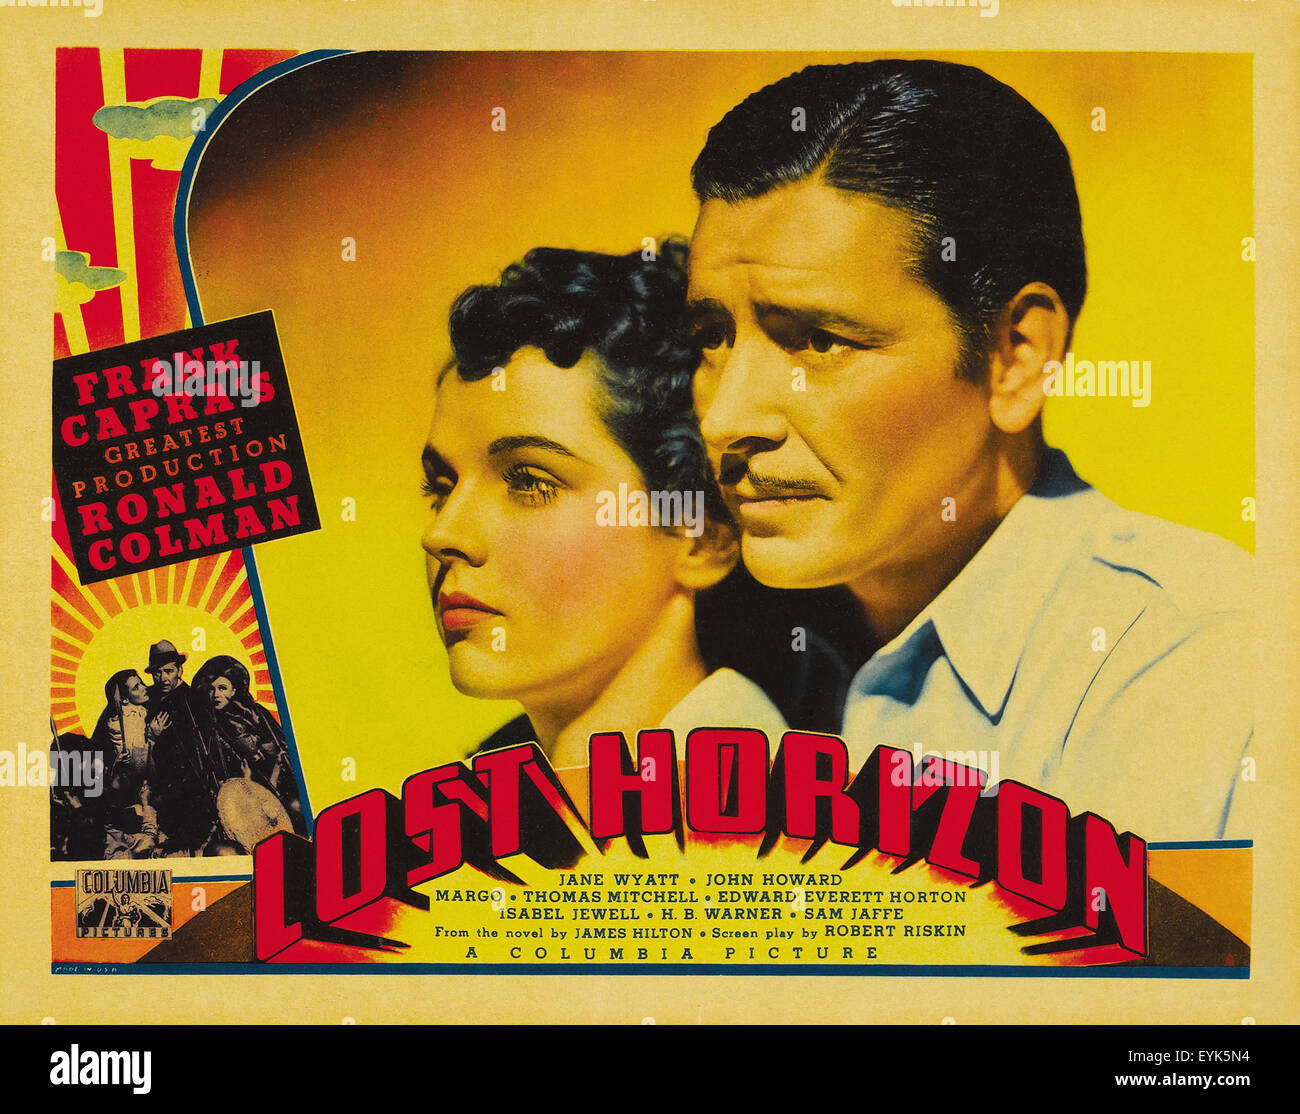 Lost Horizon'', 1937, starring Ronald Colman Jigsaw Puzzle by Movie World  Posters - Pixels